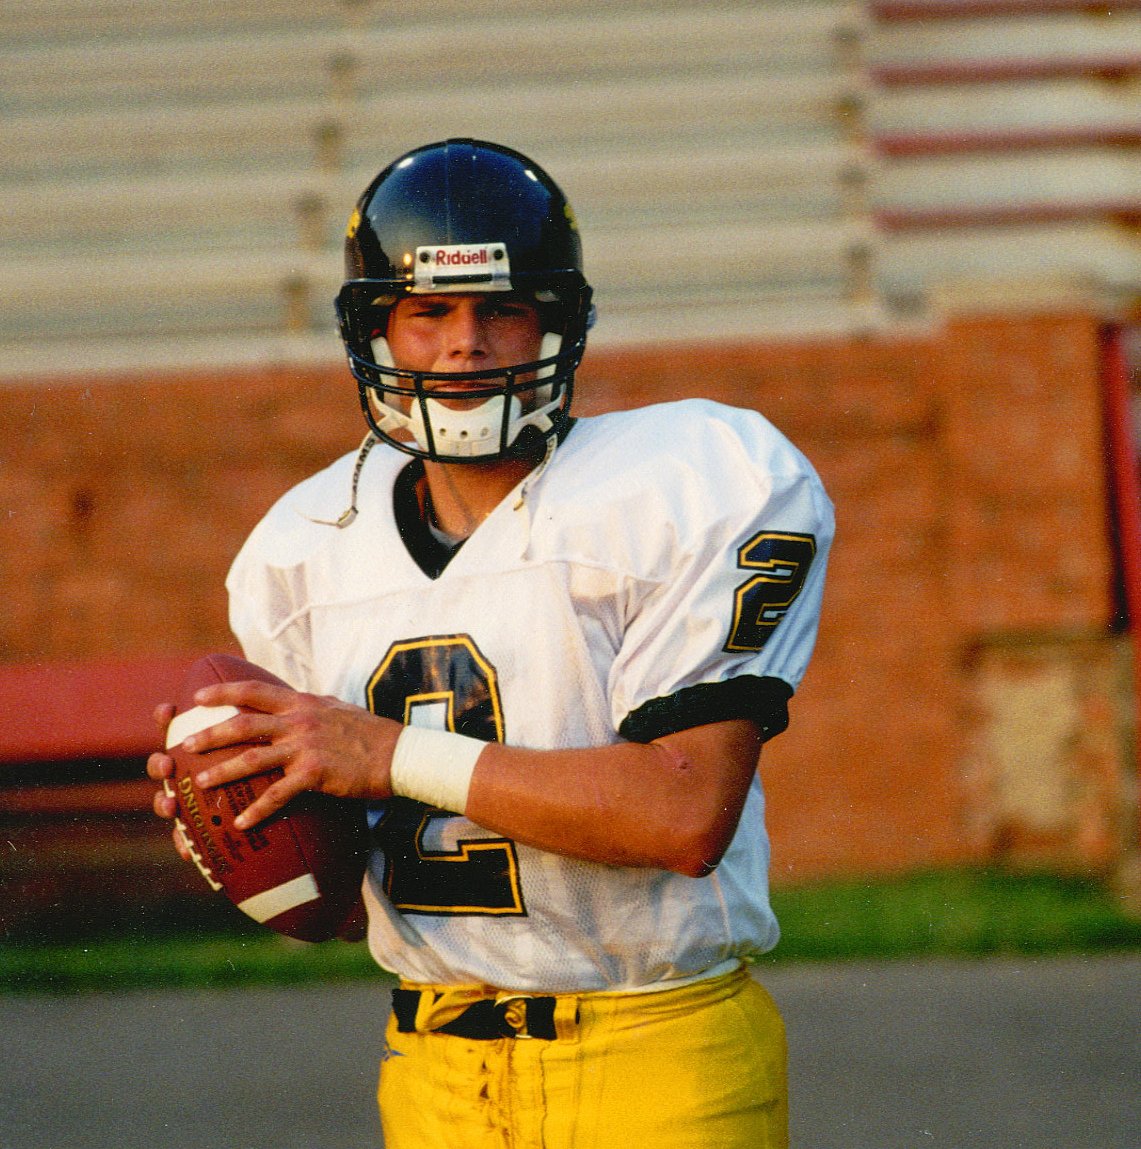 𝟭𝟬𝟬 𝗬𝗲𝗮𝗿𝘀 𝗼𝗳 𝗥𝗮𝗰𝗲𝗿 𝗙𝗼𝗼𝘁𝗯𝗮𝗹𝗹 ⭐️ Murray State's first 500-yard passer... Justin Fuente threw for 553ydsvs Southern Illinois on Sept. 11, 1999 in Carbondale! #GoRacers🏇